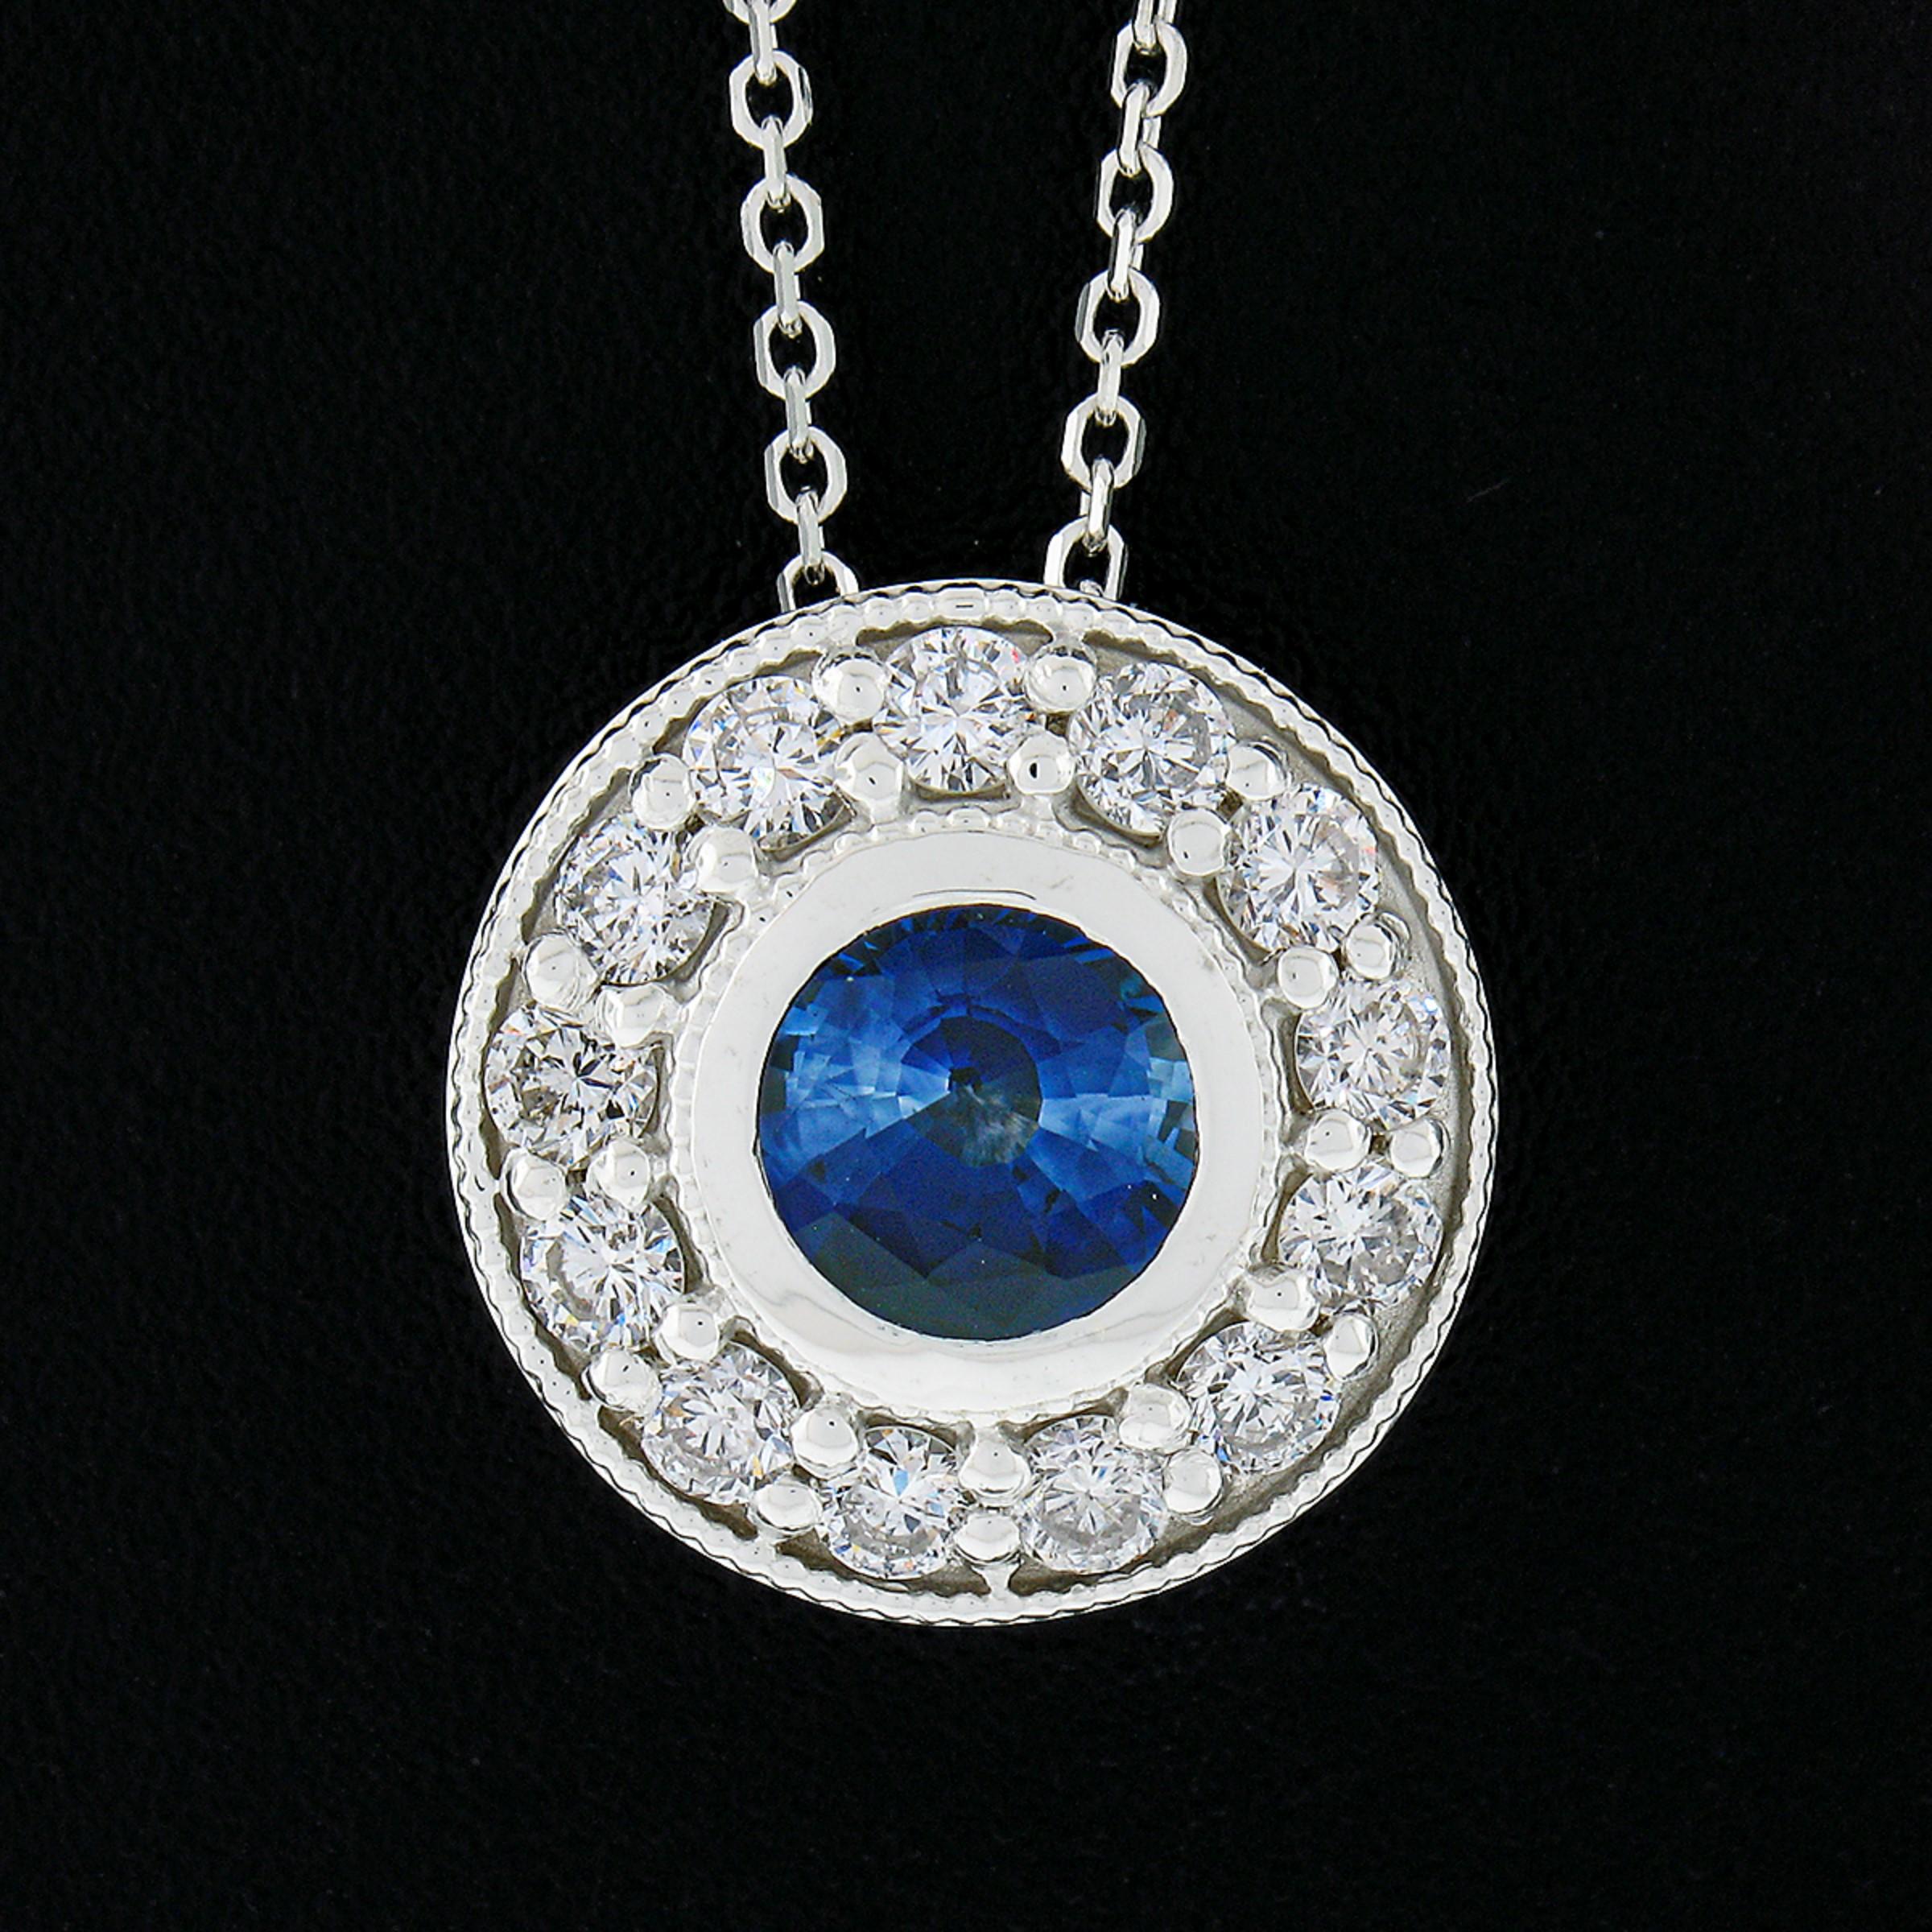 This stunning pendant necklace is newly crafted in solid 14k white gold and features a gorgeous sapphire neatly bezel set at the center of a fine diamond halo. The round brilliant cut sapphire is an attractive size, weighing exactly 1.11 carats, and